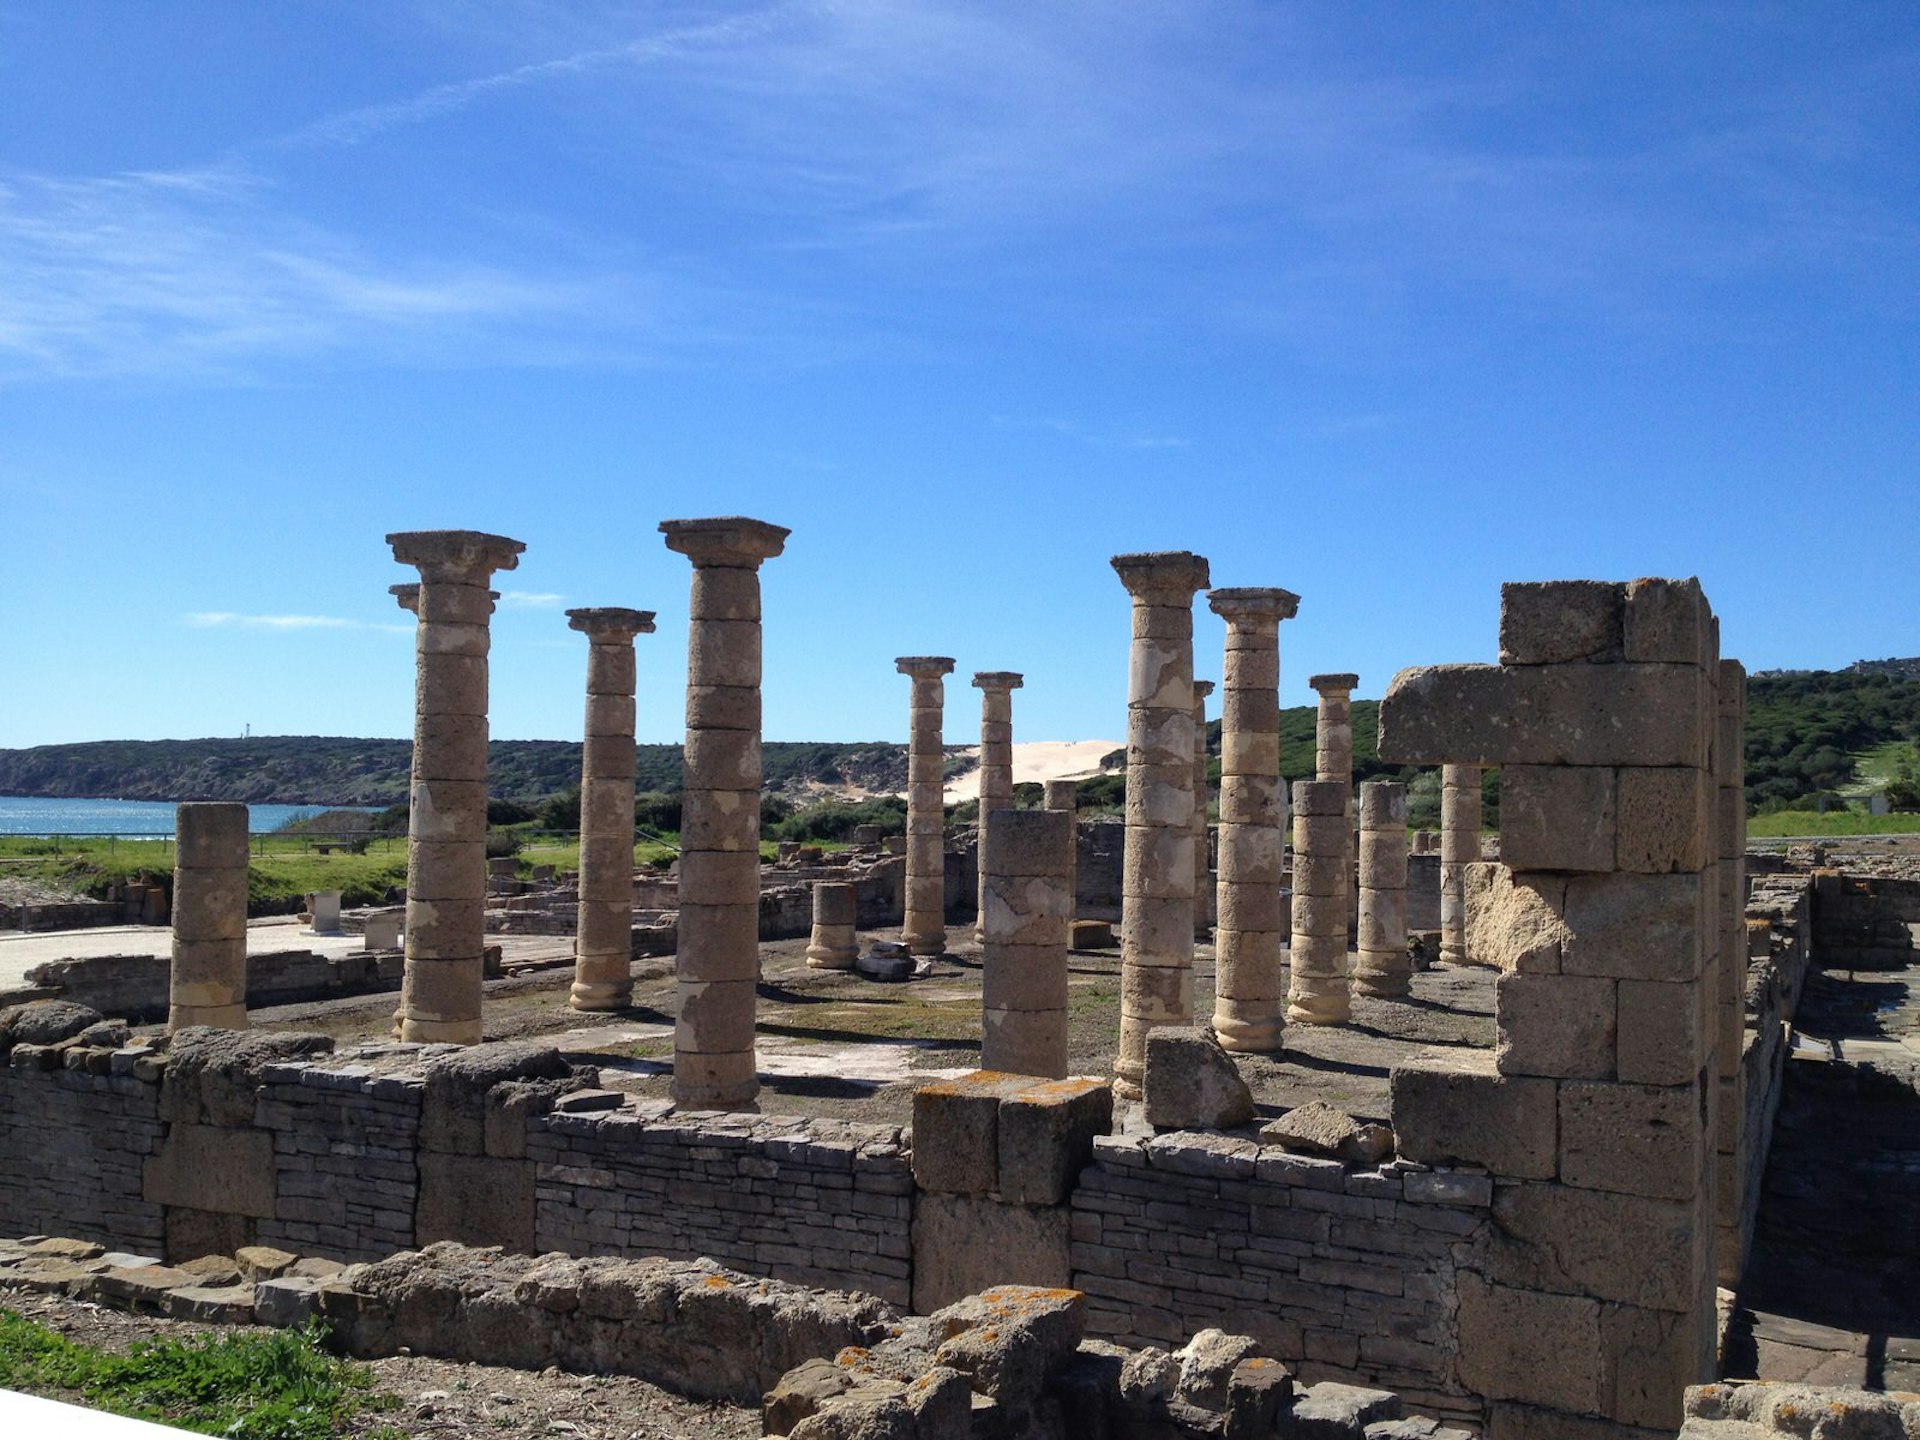 Roman ruins of Baelo Claudia in Bolonia under a clear blue sky. The ruins consist of several intact stone pillars and some half pillars as well as the buildings foundation made out of smaller stones and one corner made from larger, brick-like stones. 